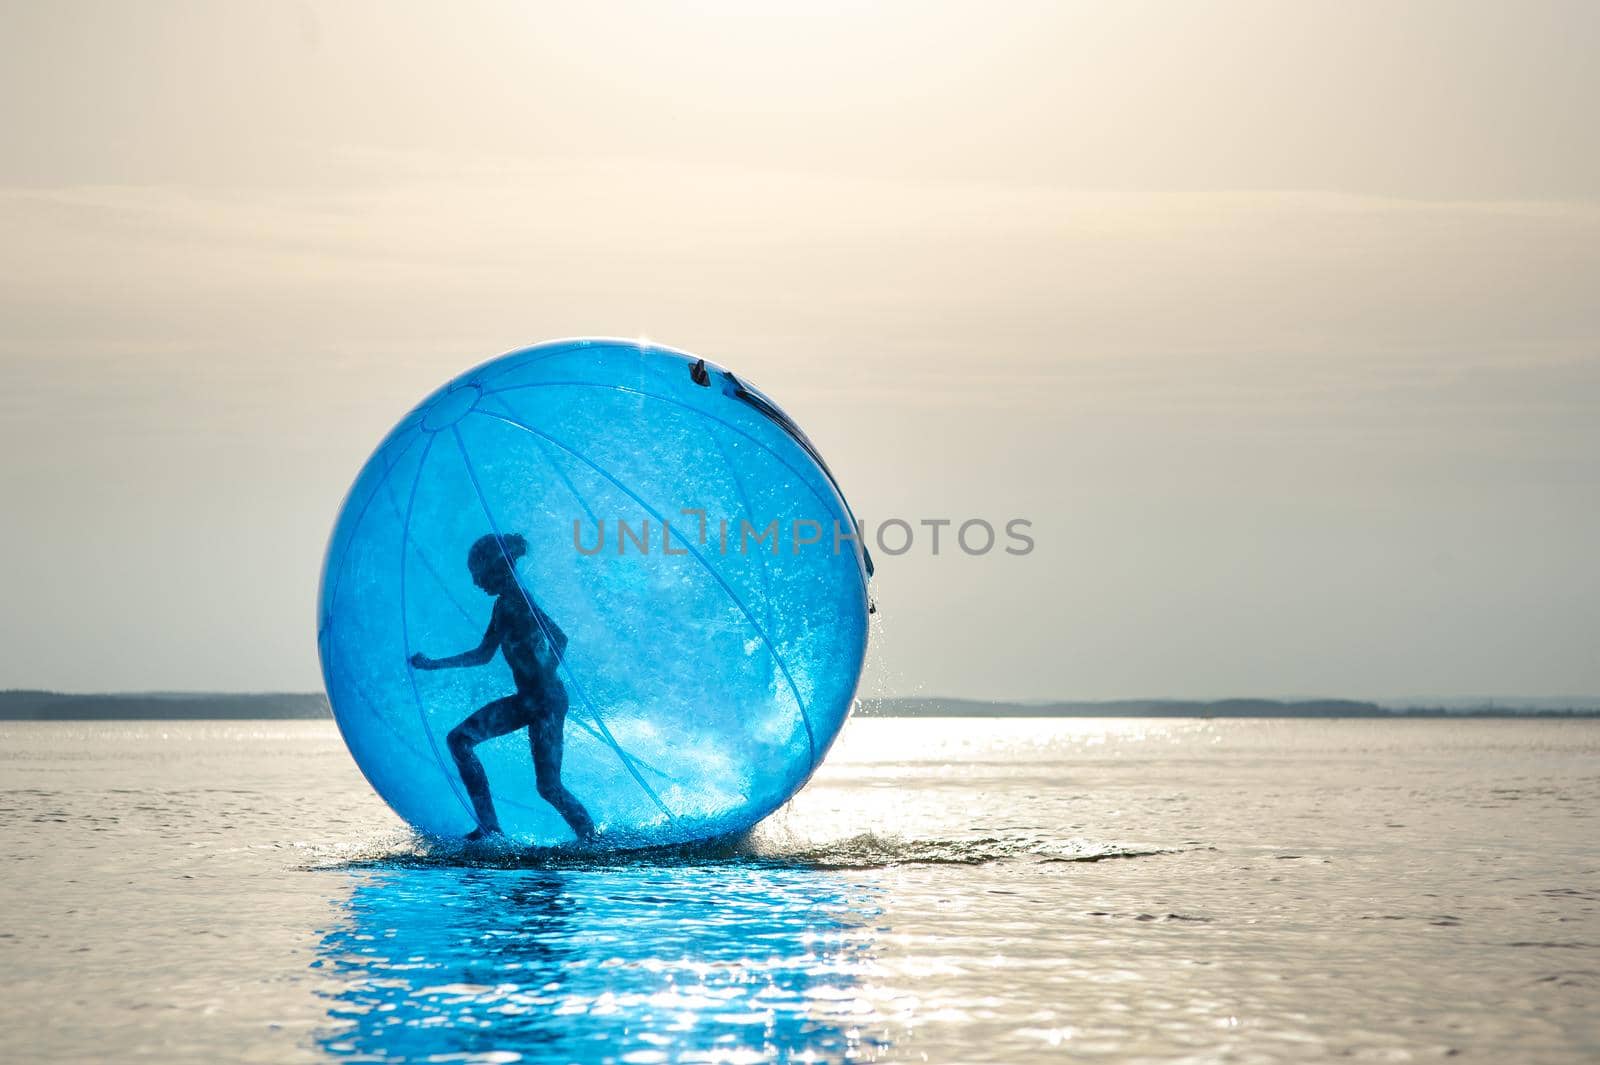 A girl in an inflatable attraction in the form of a ball on the sea.